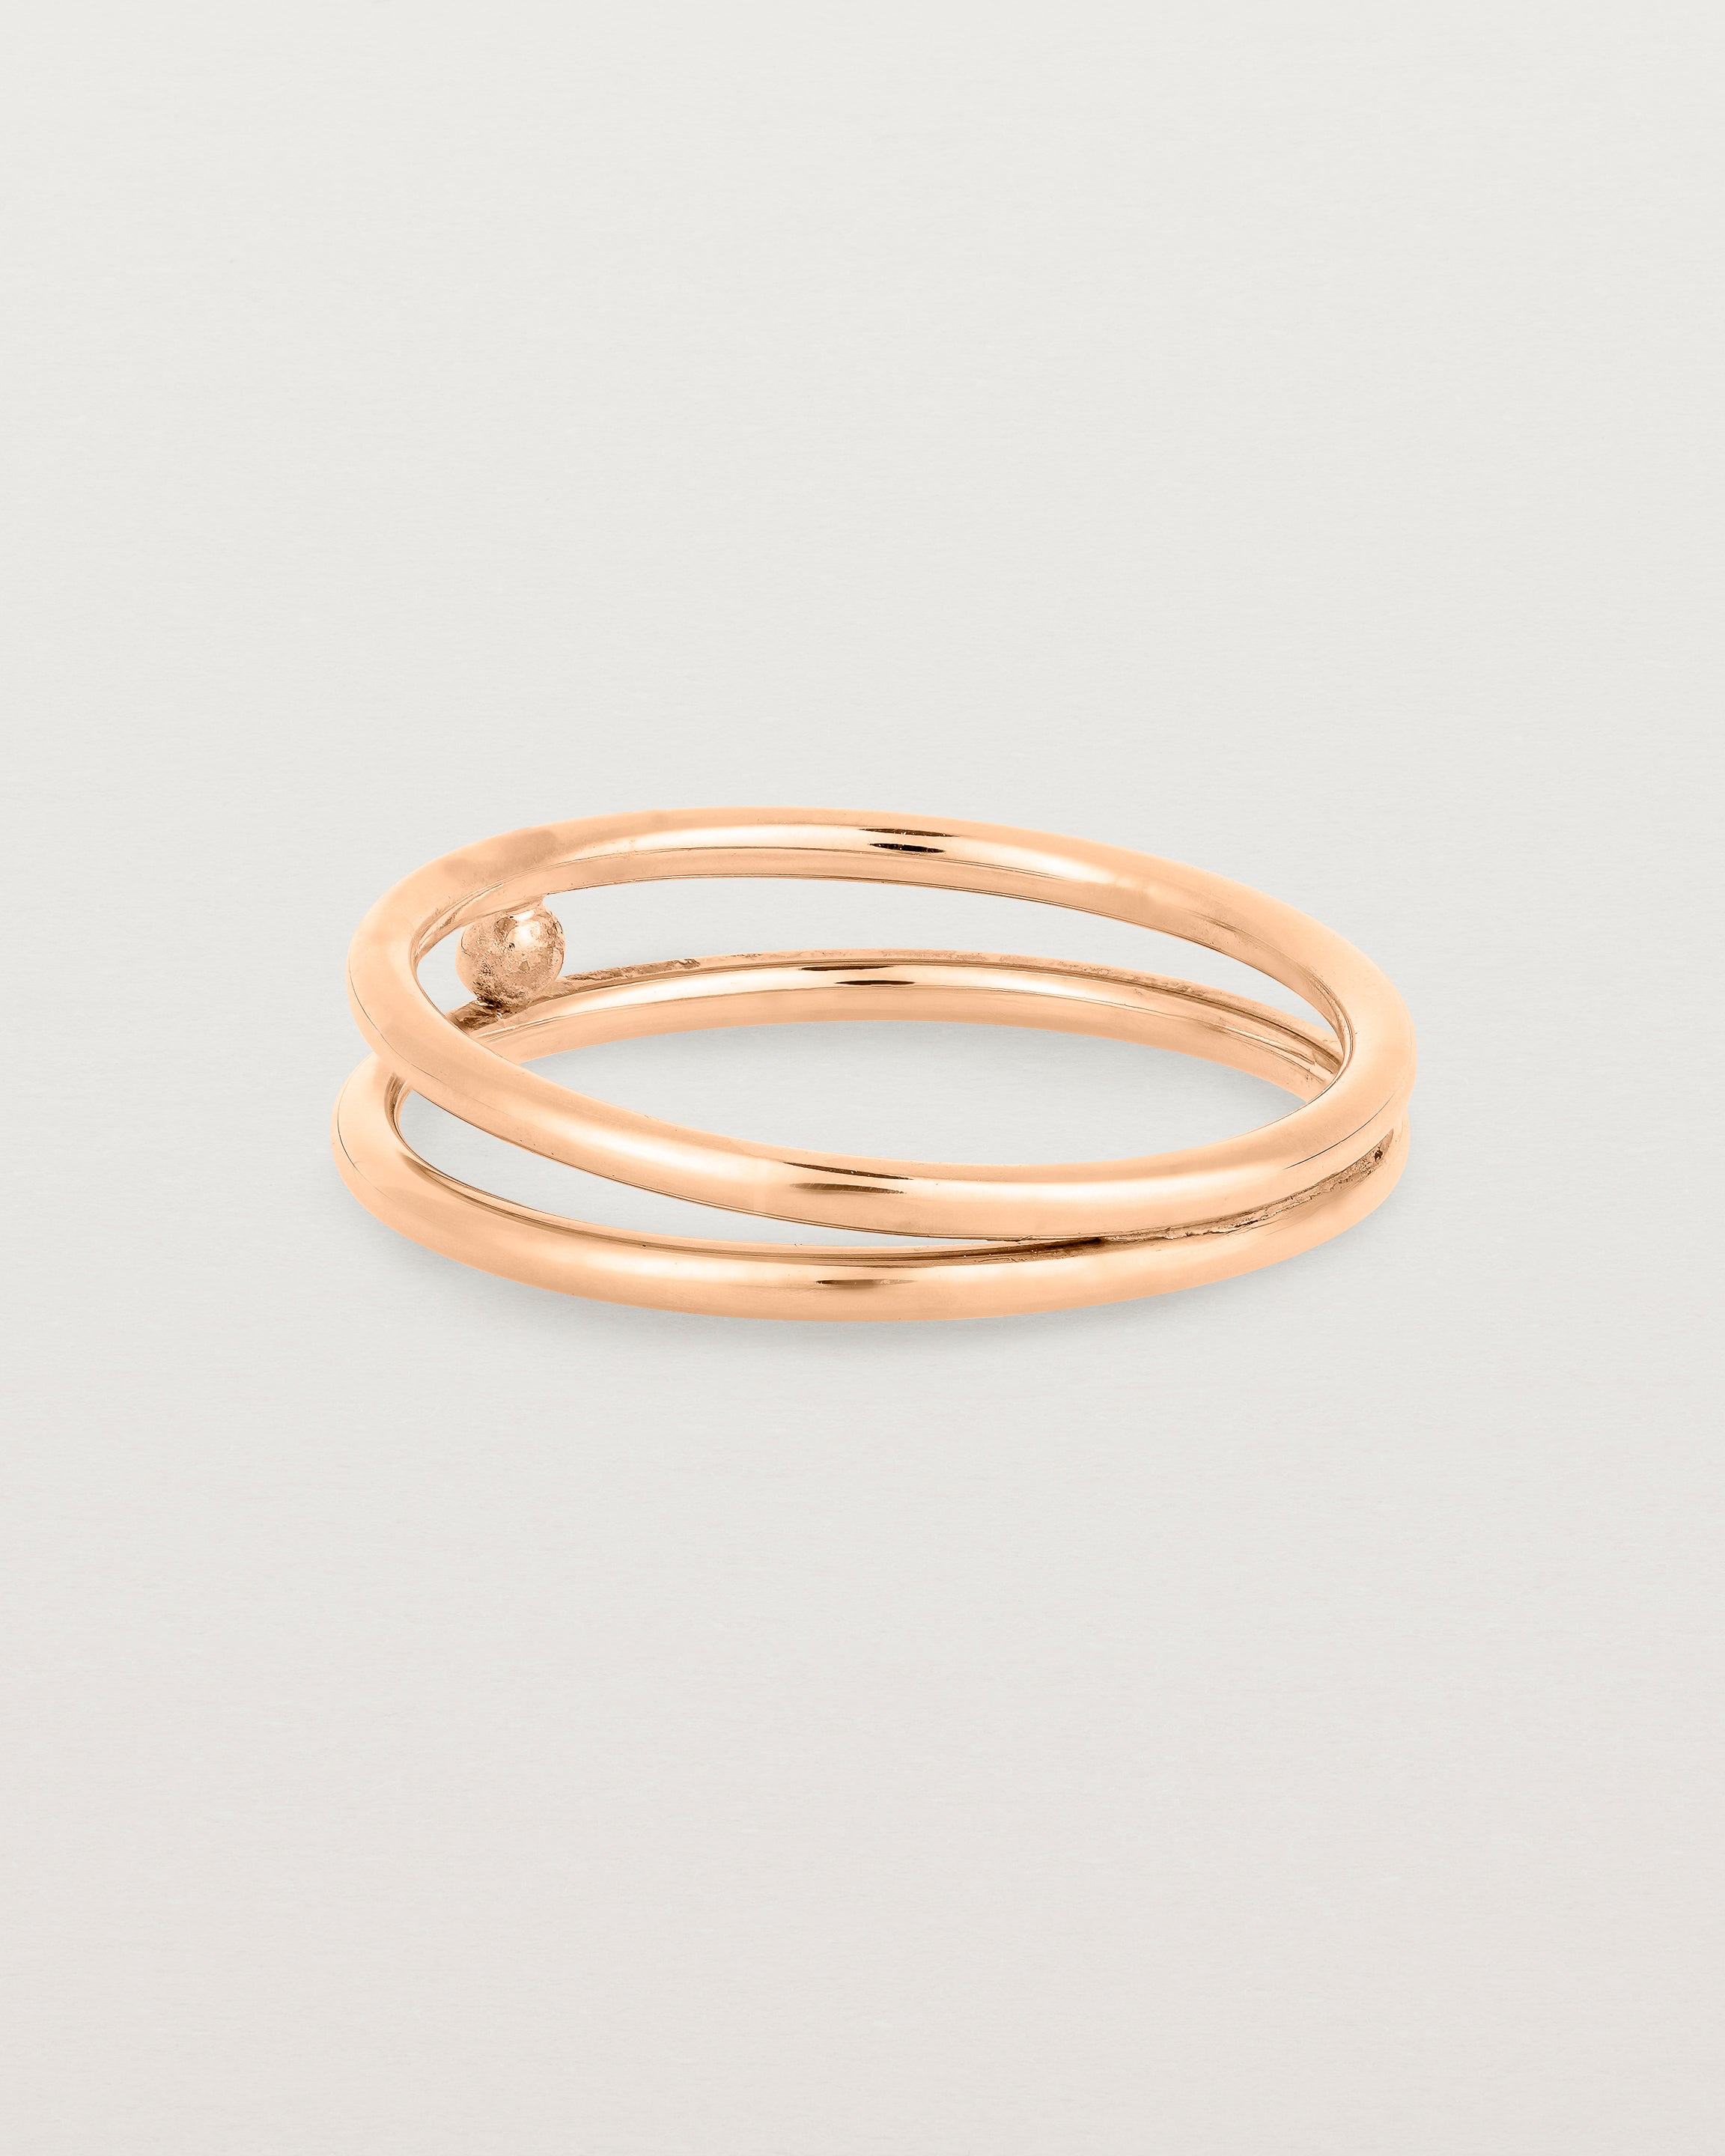 Back view of the Double Reliquum Ring in Rose Gold.